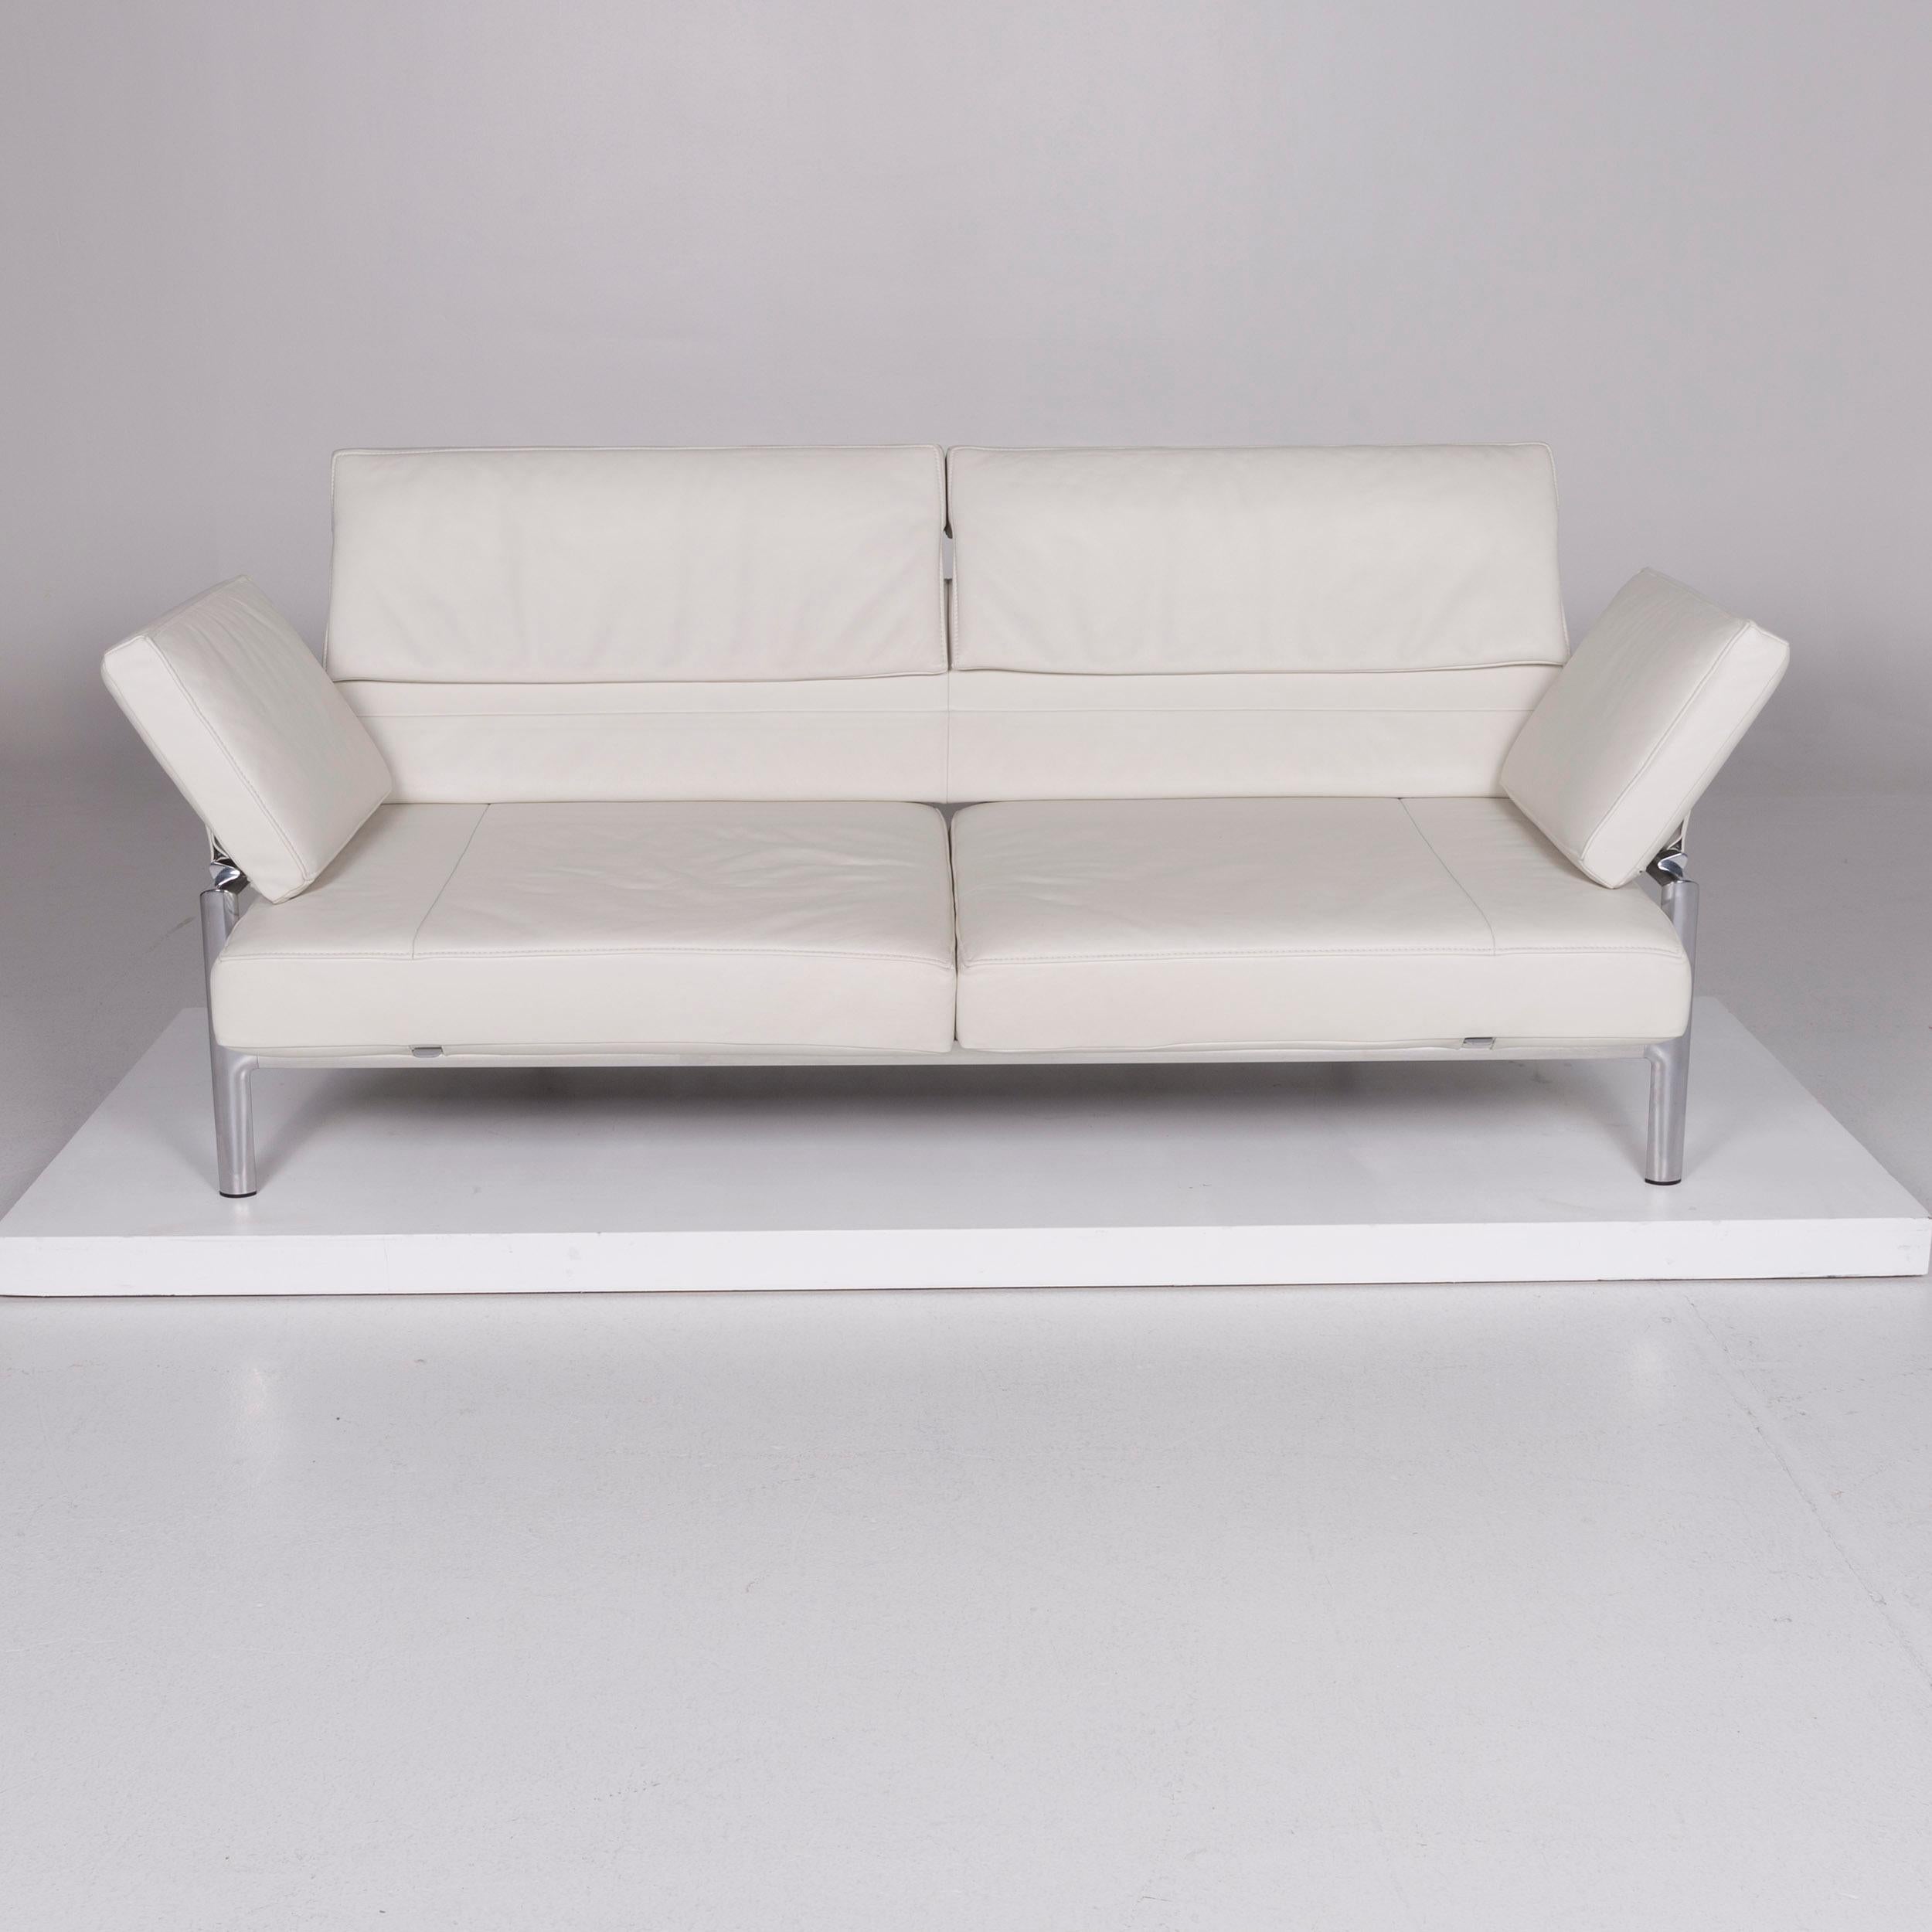 We bring to you a JORI leather sofa white two-seat.

 Product measurements in centimeters:
 
Depth 88
Width 208
Height 84
Seat-height 41
Rest-height 55
Seat-depth 57
Seat-width 162
Back-height 42.
            